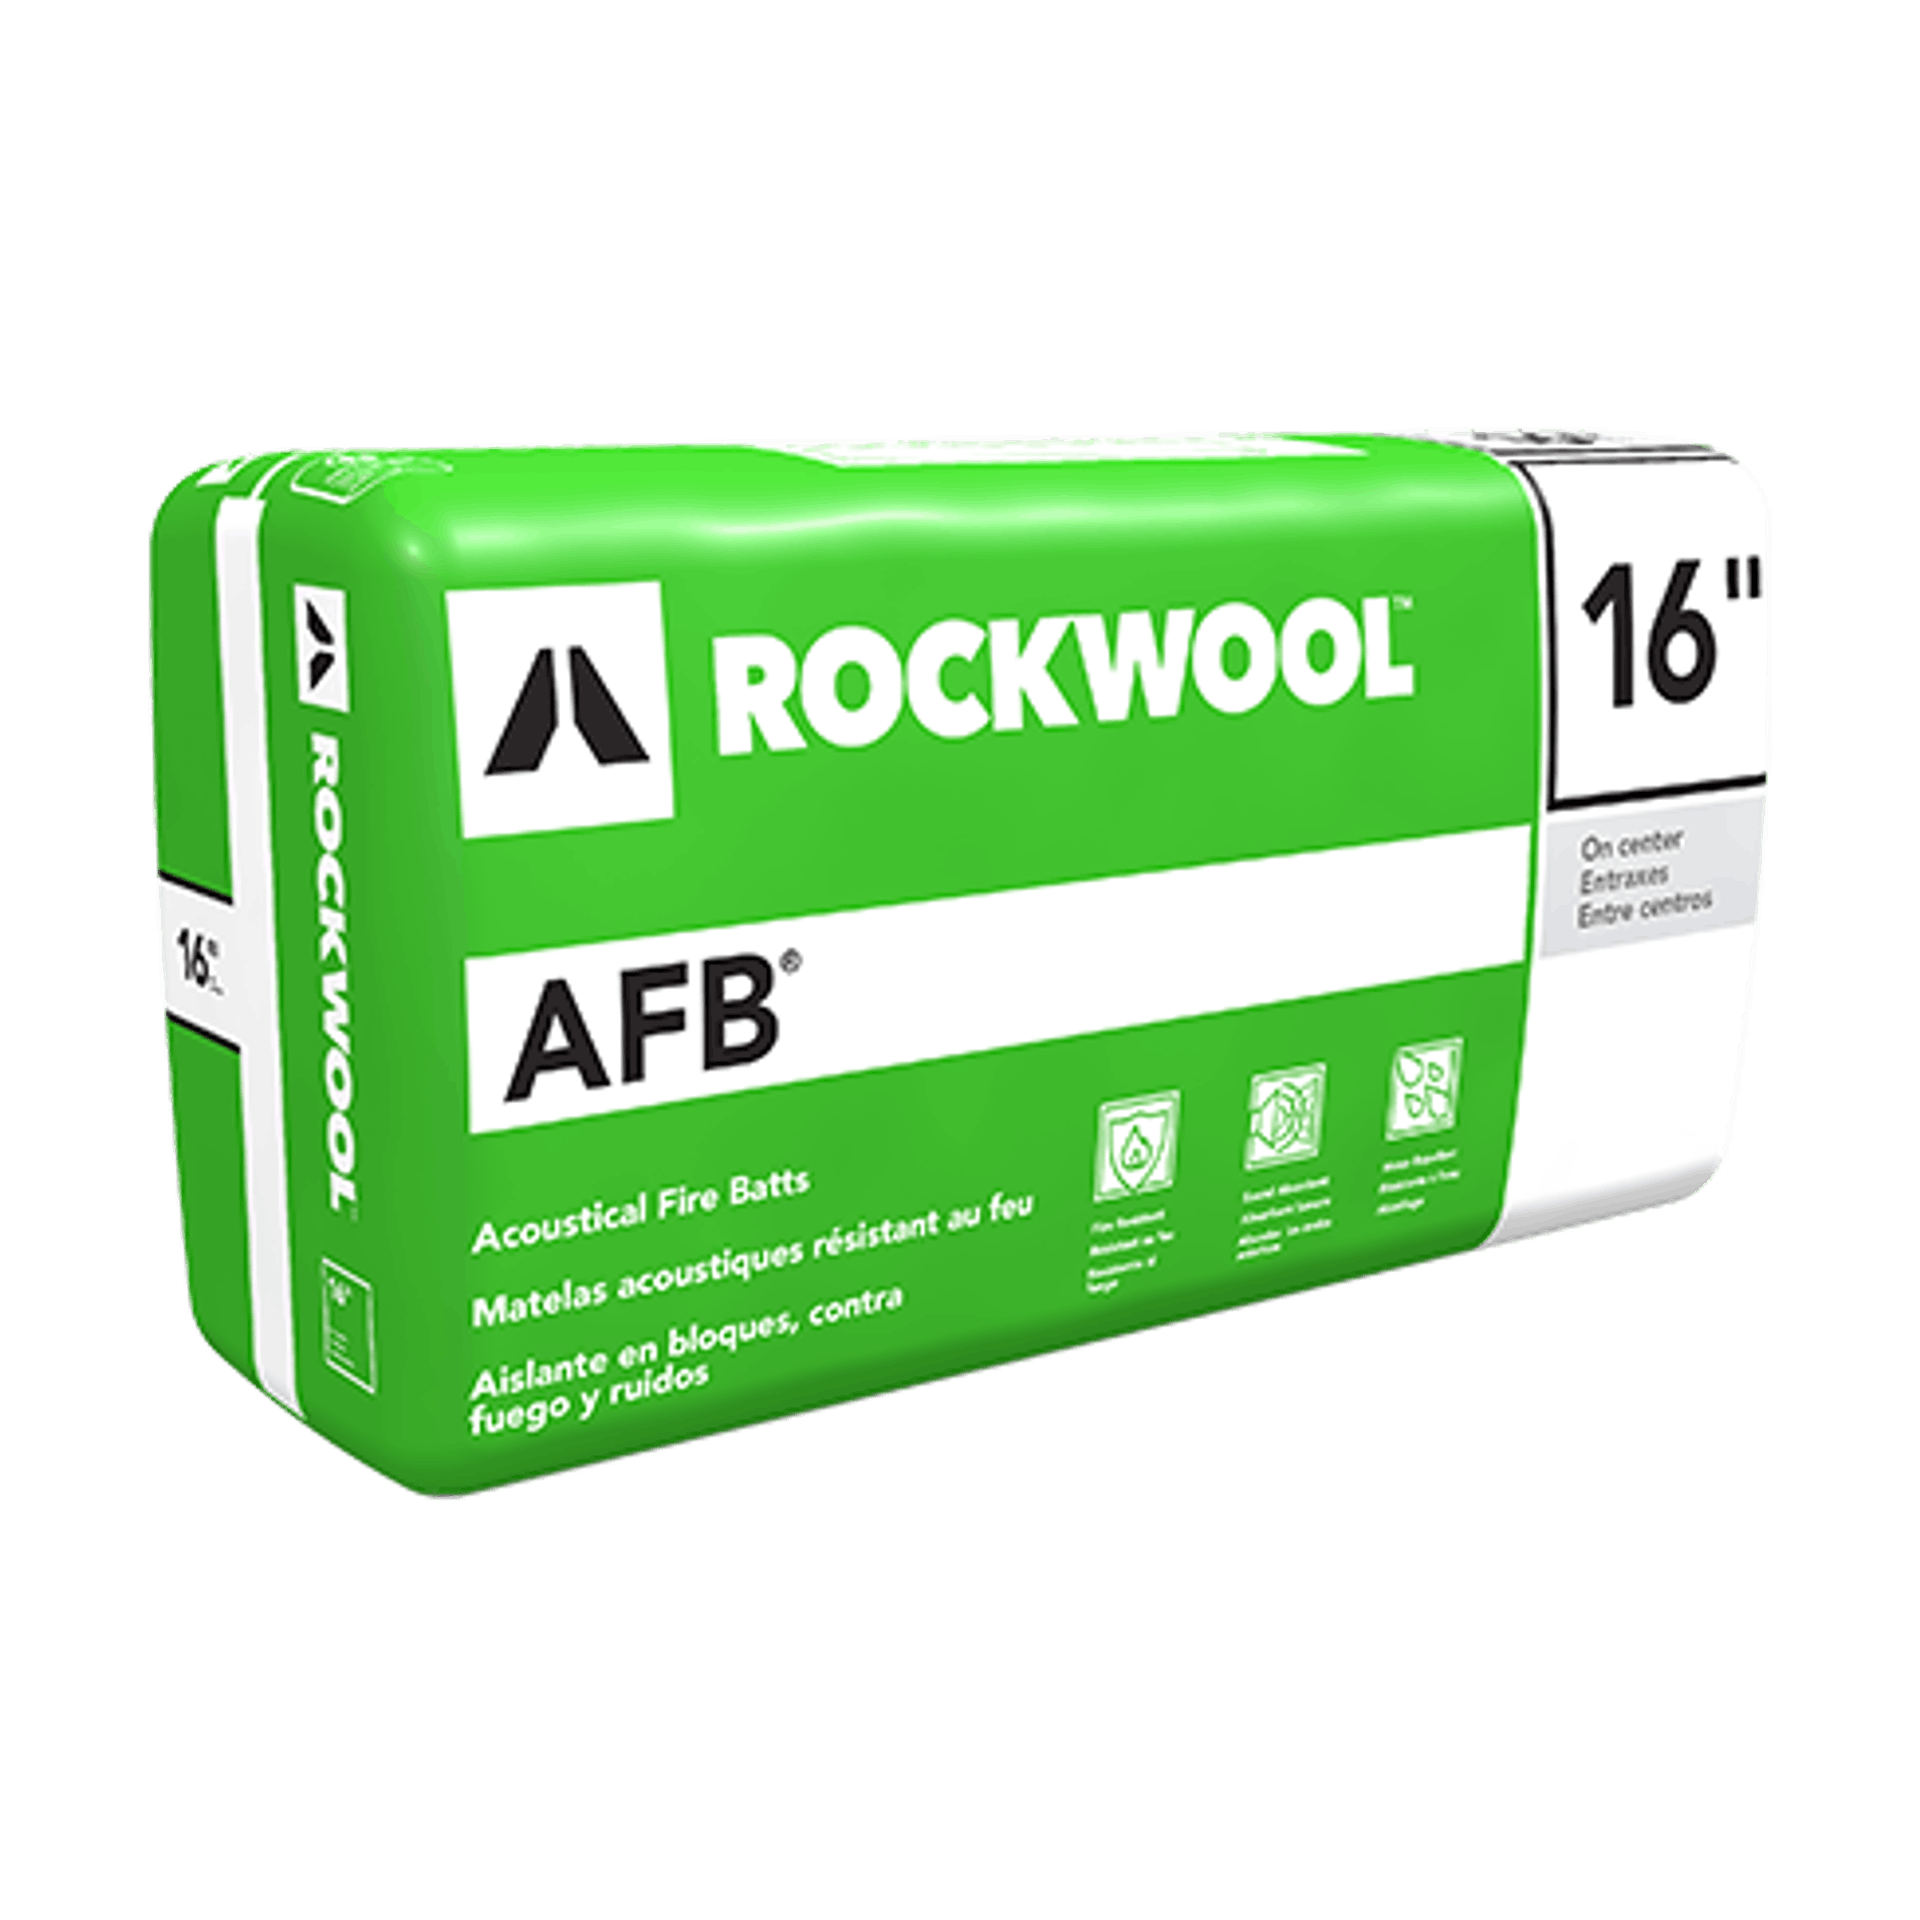 ROCKWOOL AFB acoustical fire batt insulation for interior steel and wood stud wall and floor applications